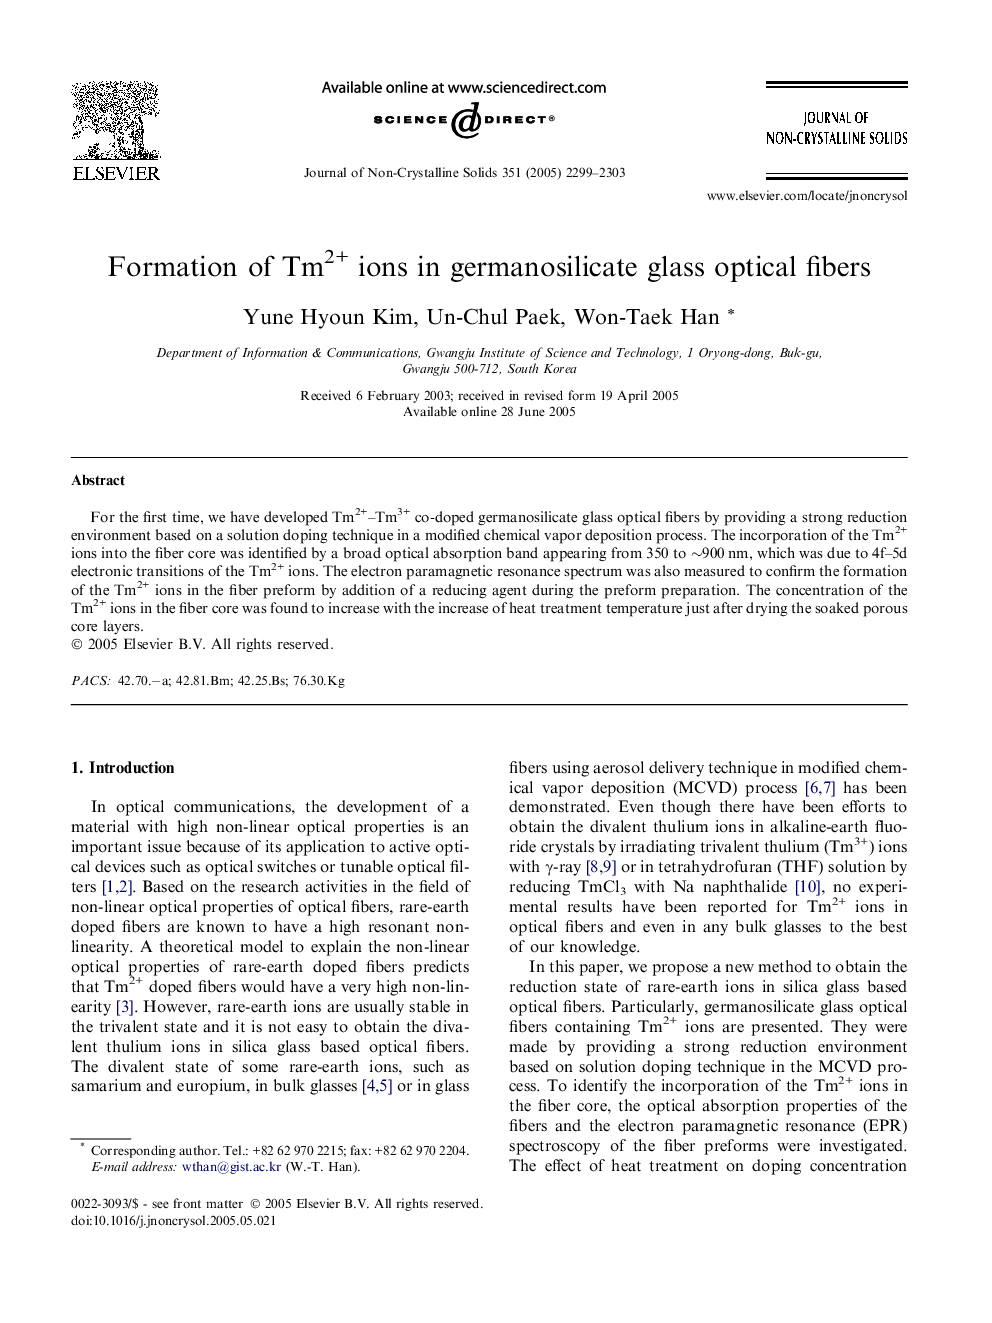 Formation of Tm2+ ions in germanosilicate glass optical fibers